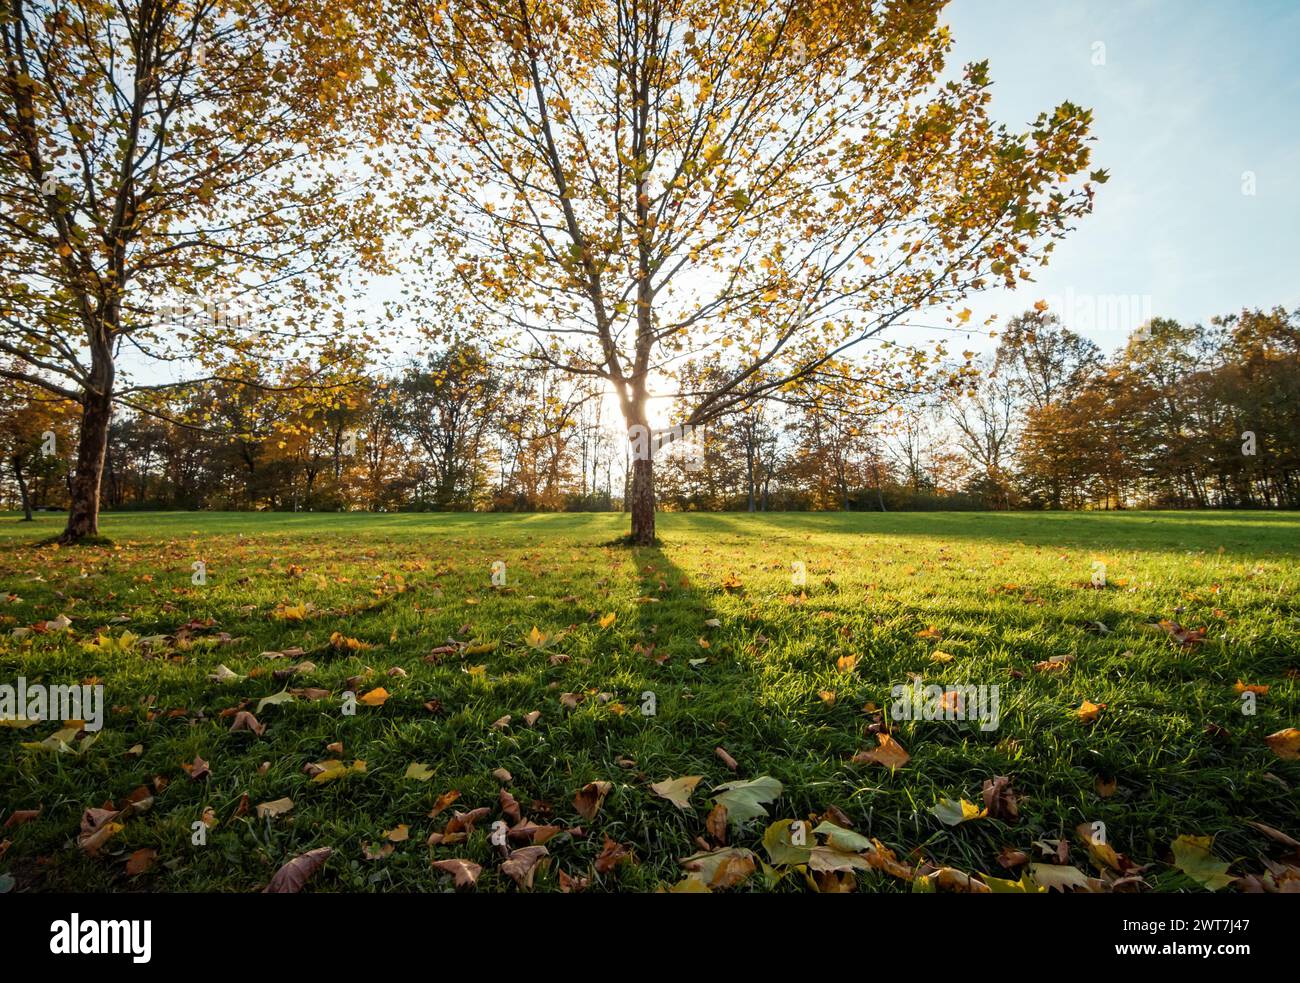 Setting sun moment in autumn park. Trees cast long shadows on the grass. Sun shines through branches of deciduous tree in hilly countryside. Stock Photo